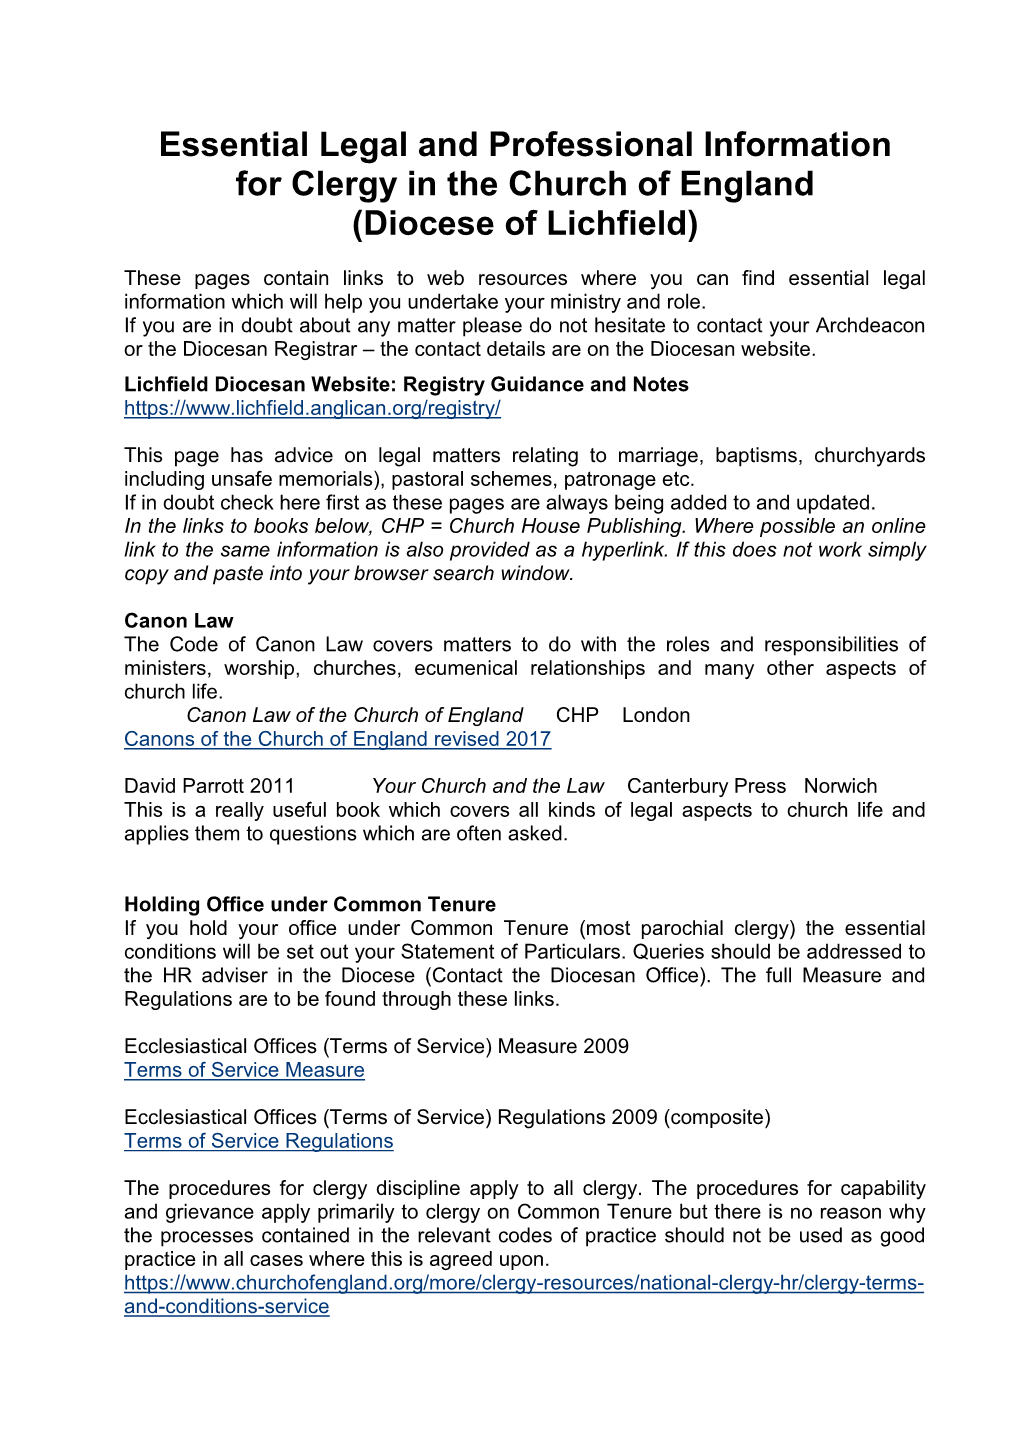 Essential Legal and Professional Information for Clergy in the Church of England (Diocese of Lichfield)